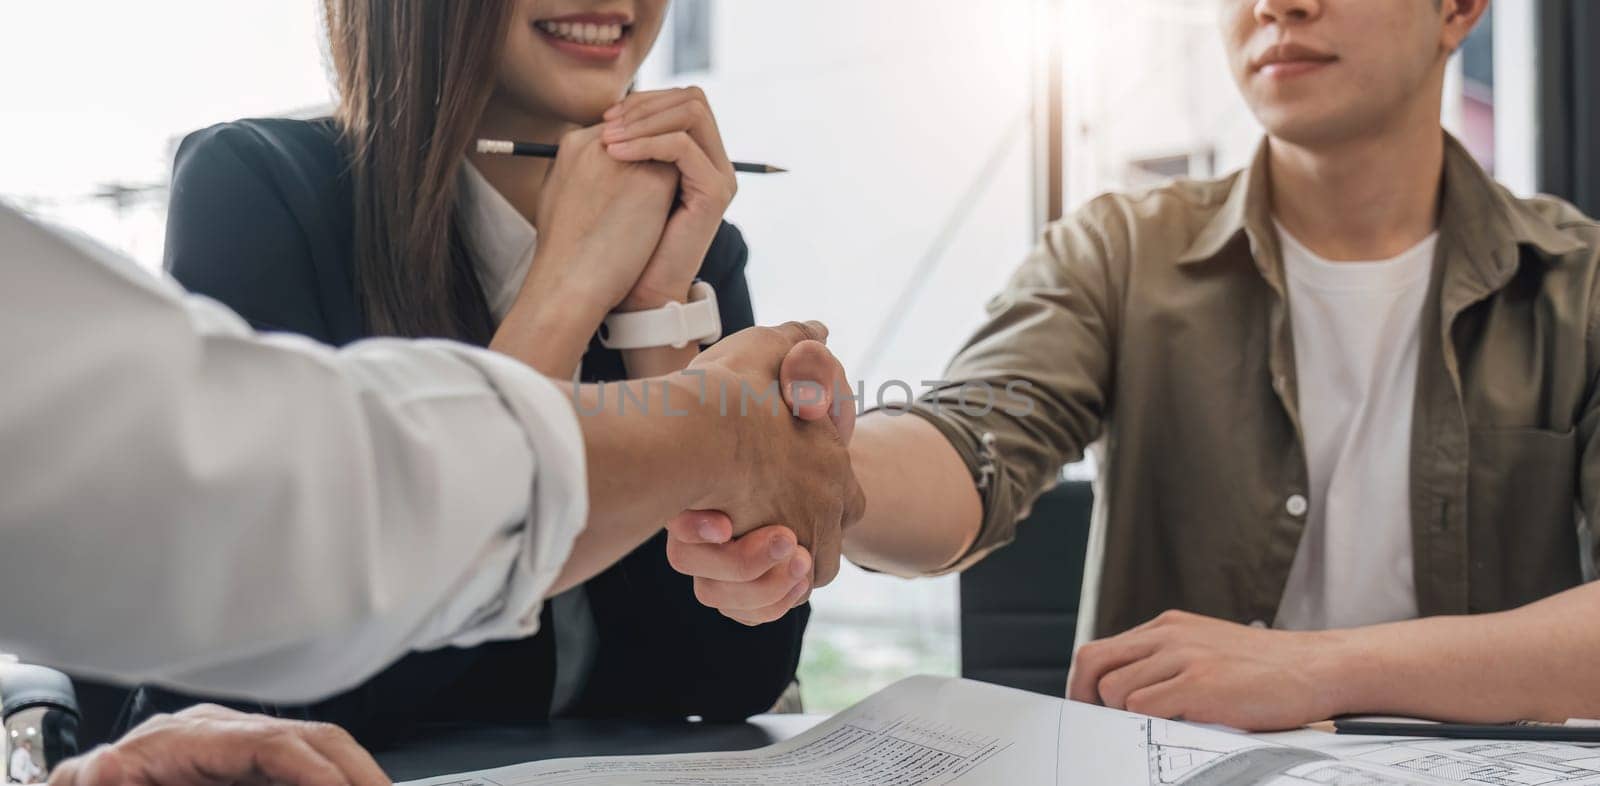 Success deal, Meeting and greeting for project of partner. Construction engineering, architect worker team or partnership hands shaking, handshake after agreement in office site, collaboration concept by wichayada